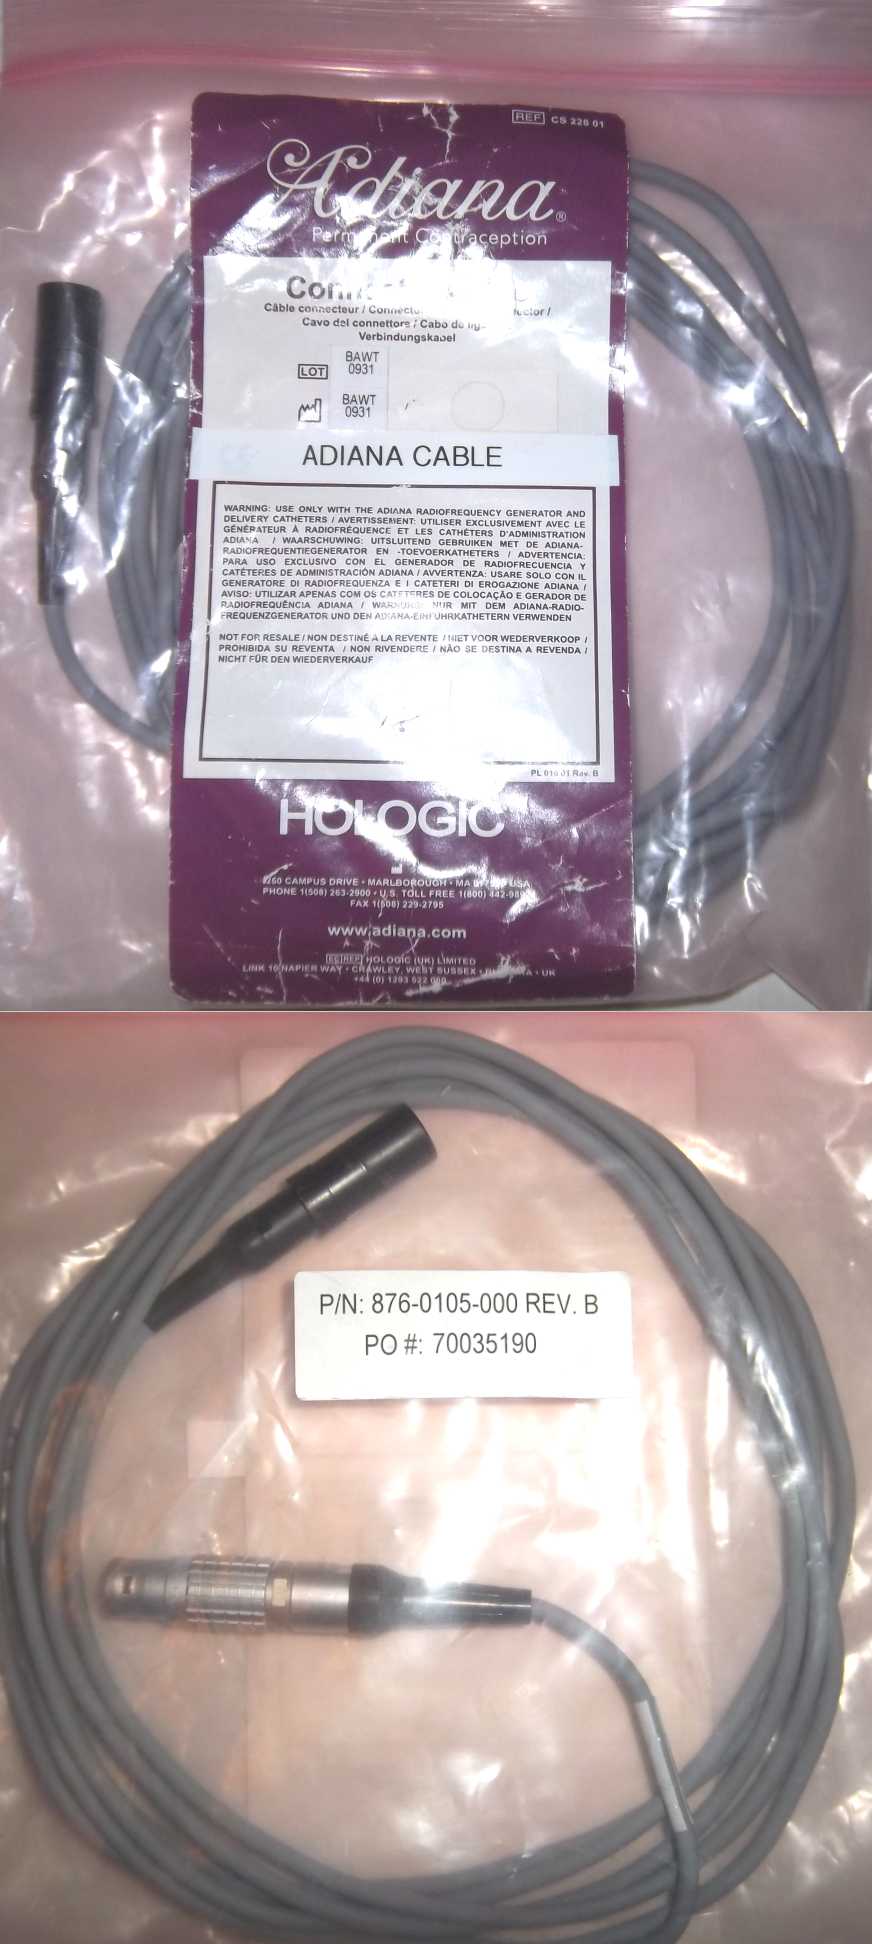 Used Adiana connector cable from Hologic cables